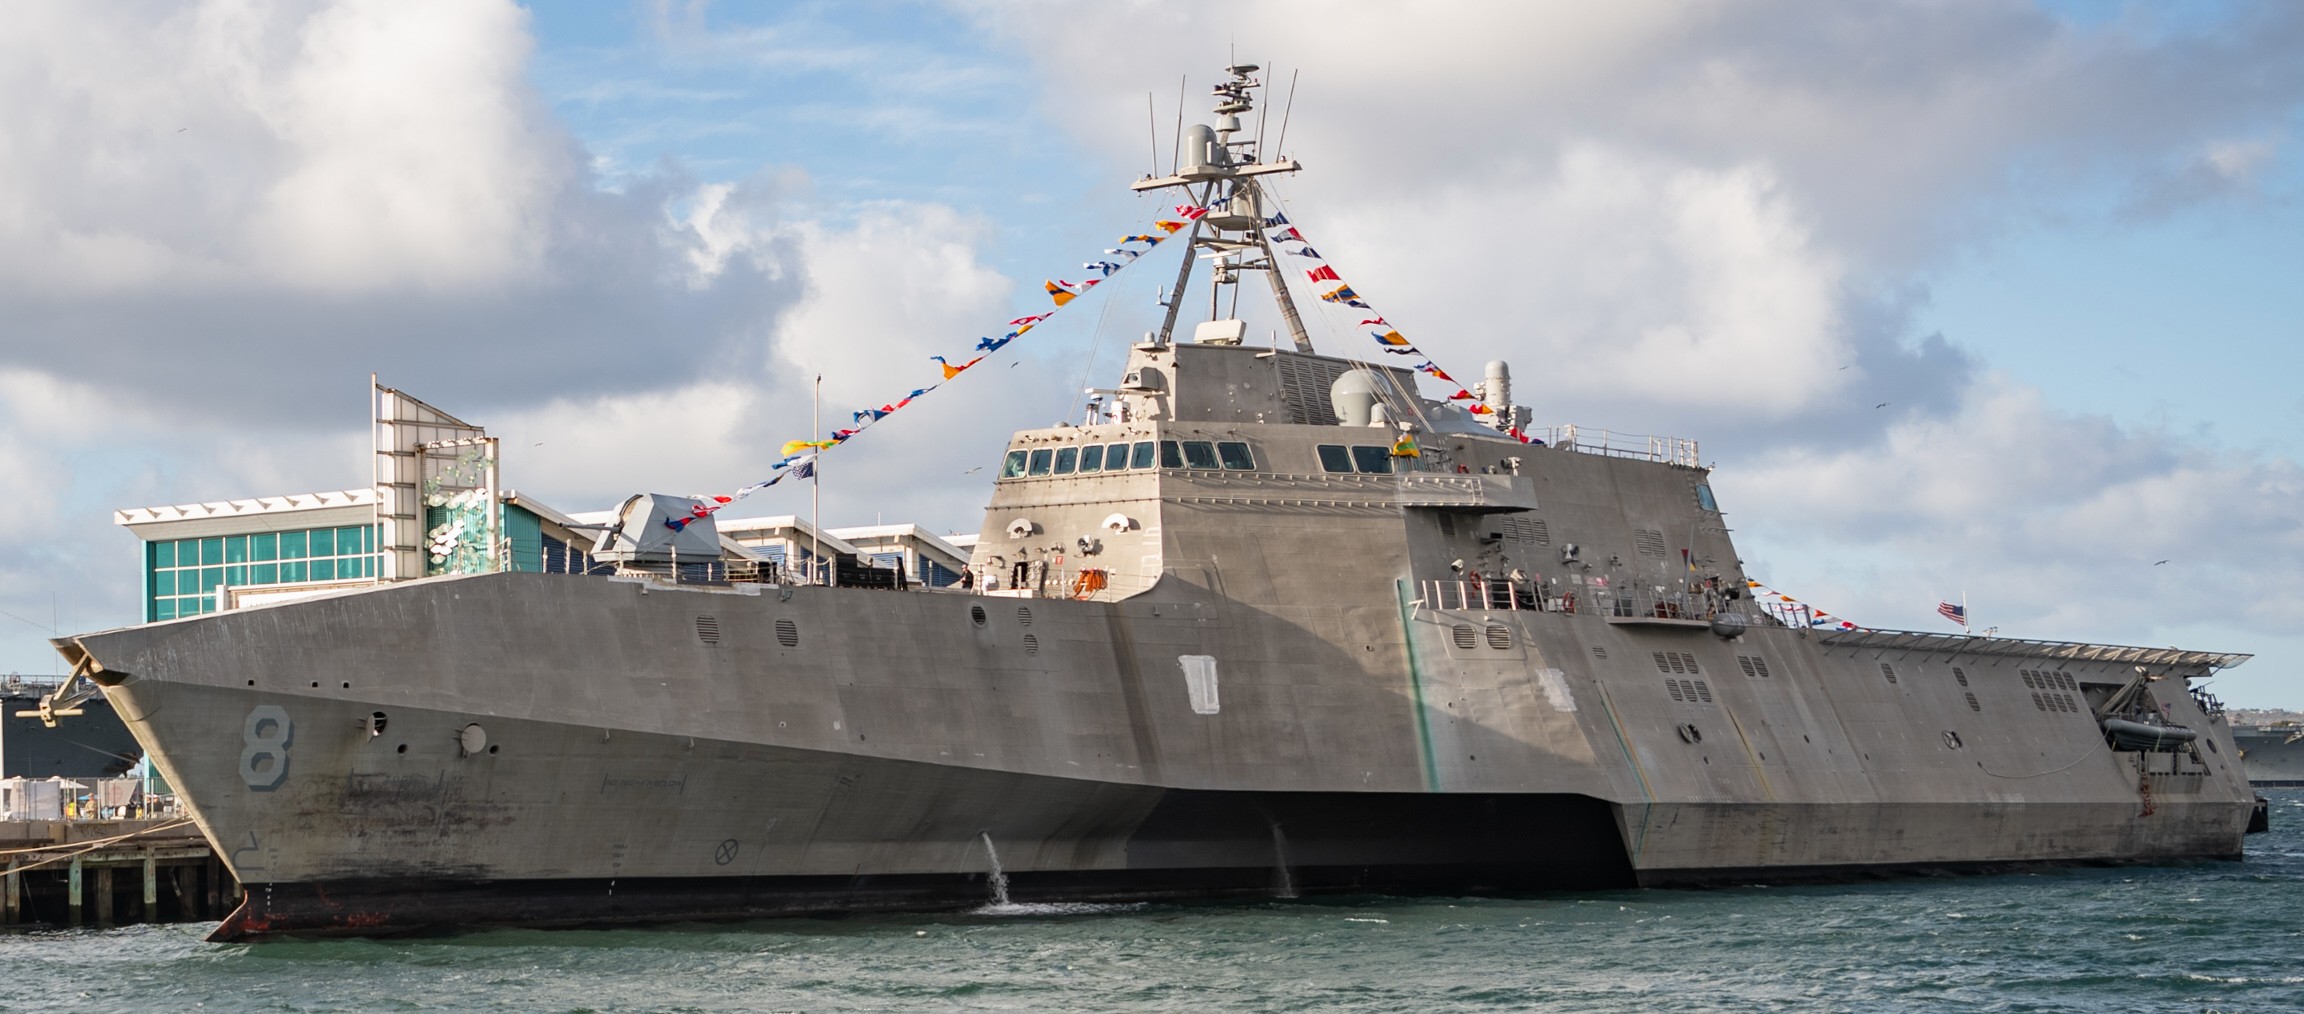 lcs-8 uss montgomery independence class littoral combat ship us navy san diego 70